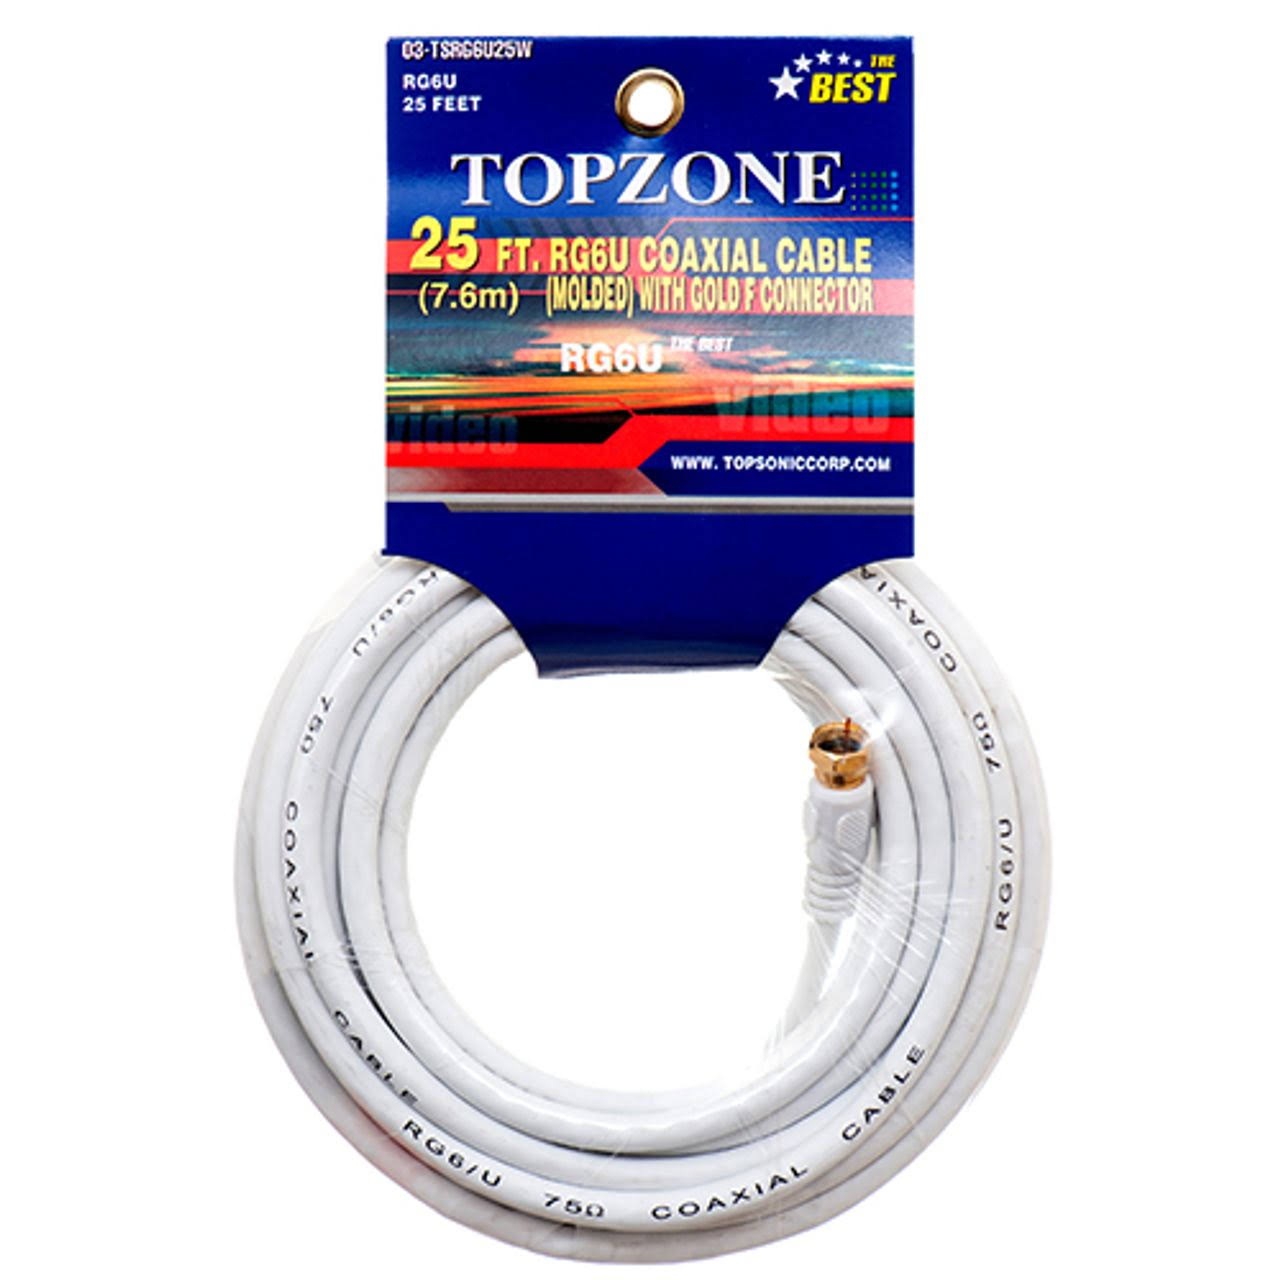 Coaxial Cable 25ft White #03-tsrg6u25w, Wholesale, Bulk (Pack of 12)